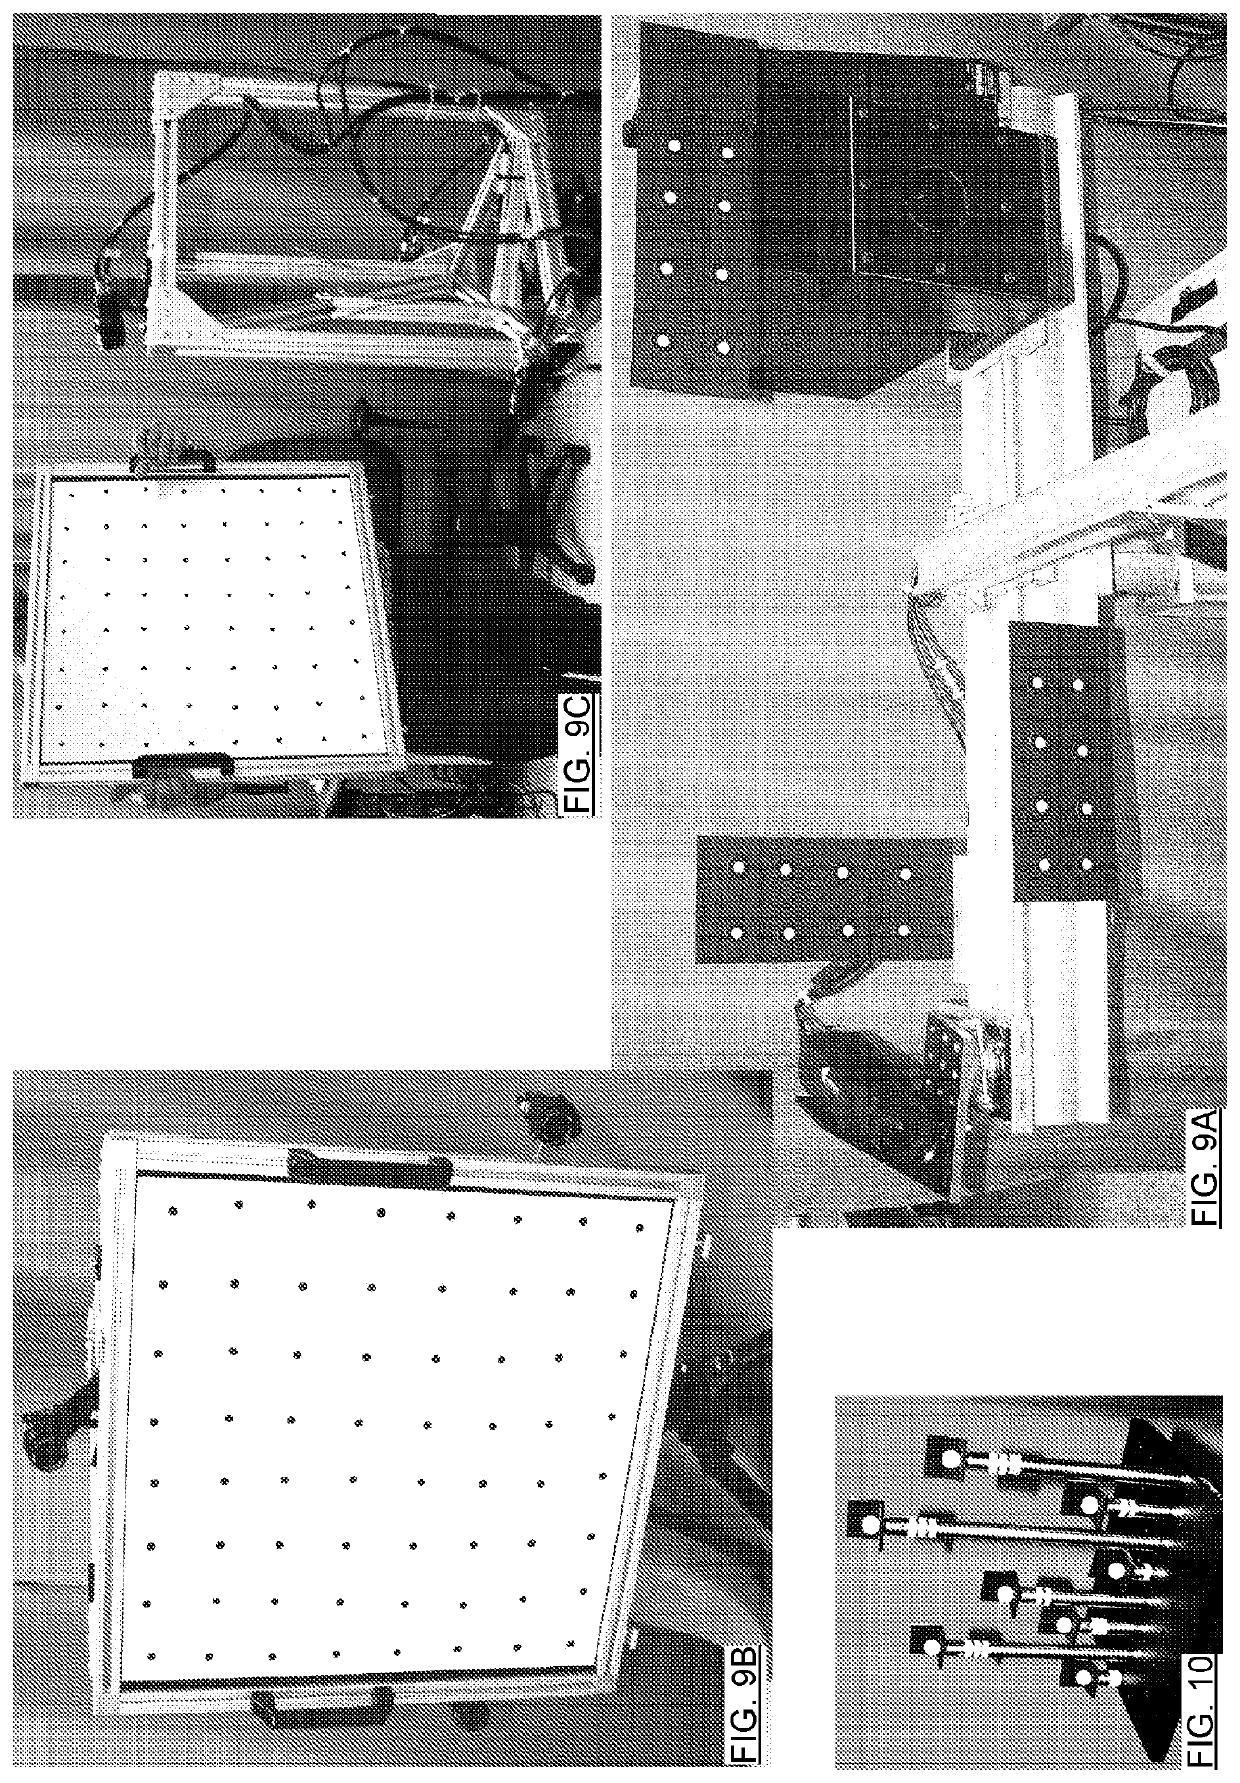 Kit and method for calibrating large volume 3D imaging systems